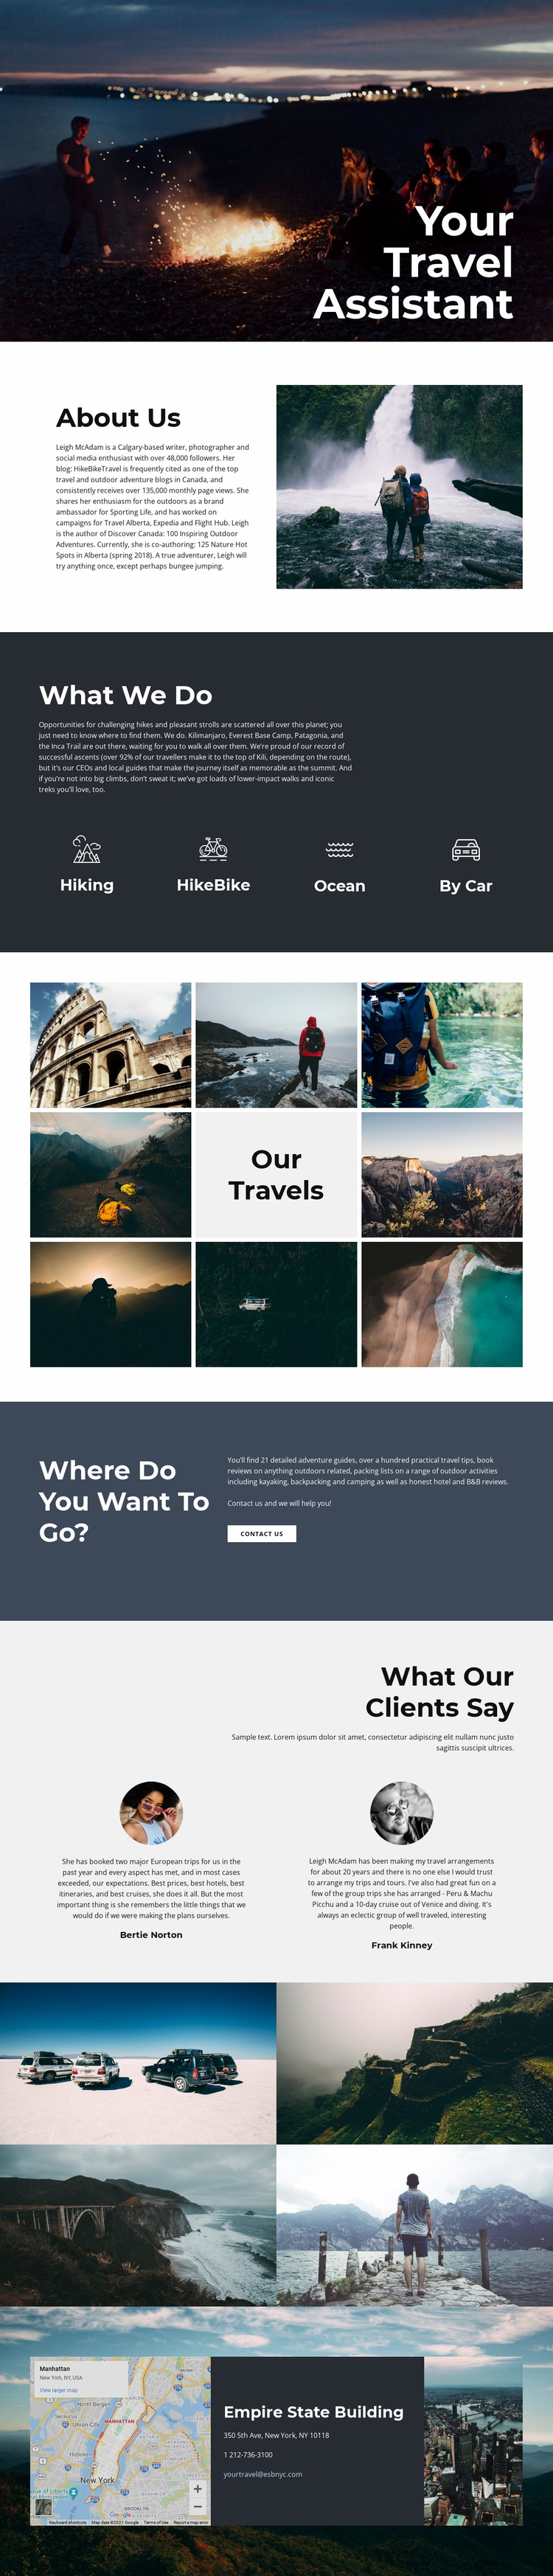 Travel Assistant Website Template